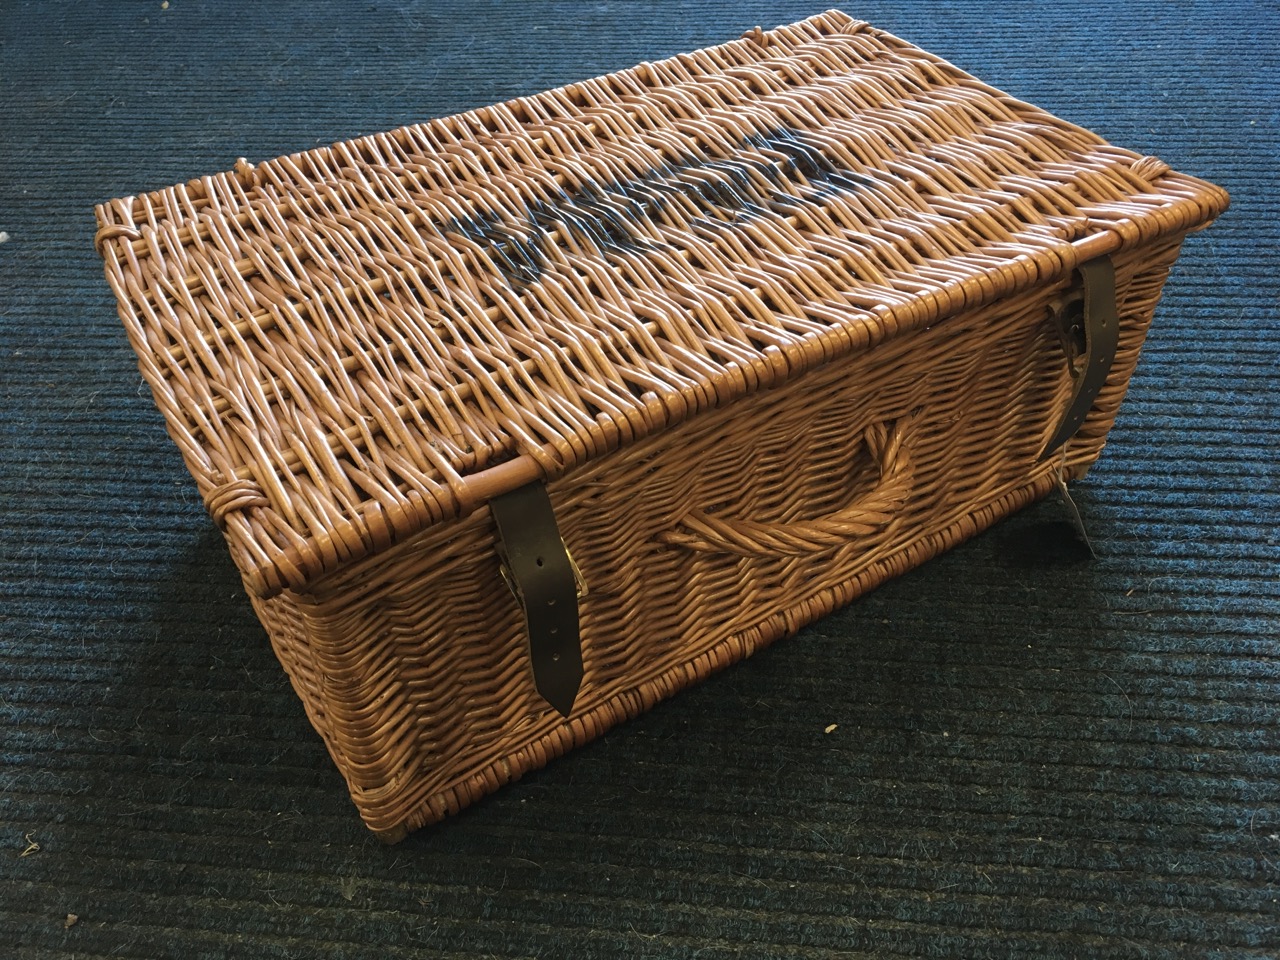 A Fortnum & Mason cane basket with handle & leather straps.